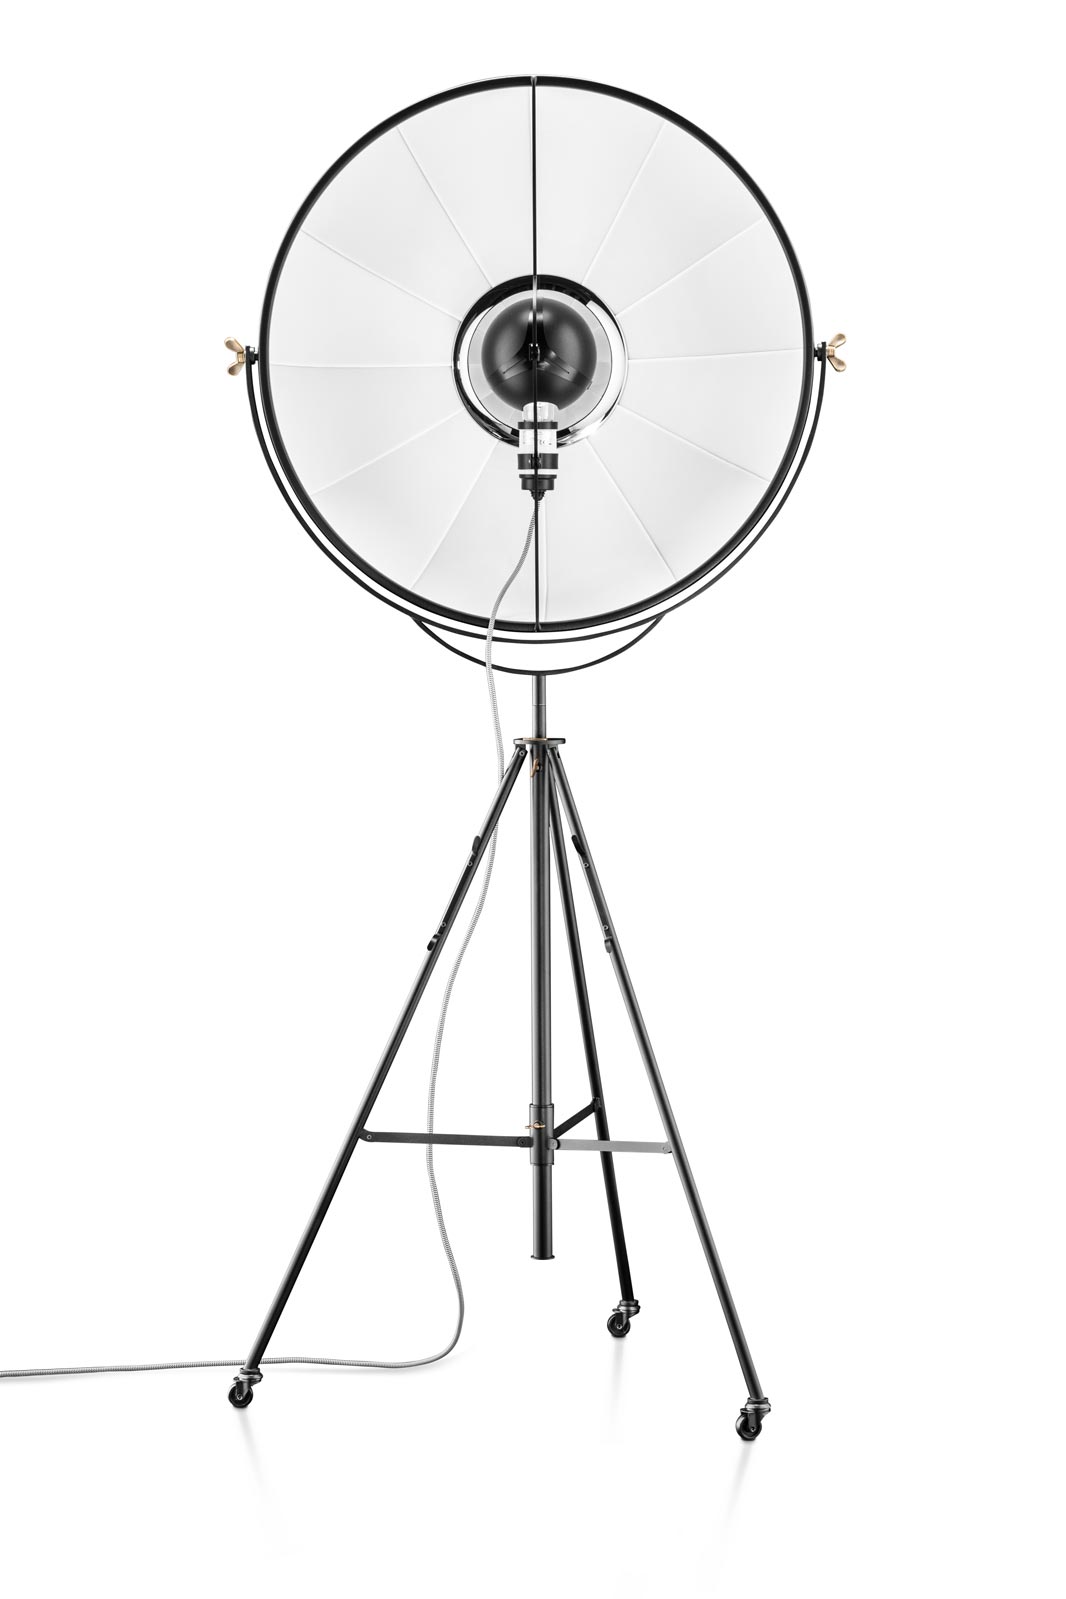 <p>Front view of the front Fortuny Black with incandescent light bulb</p>